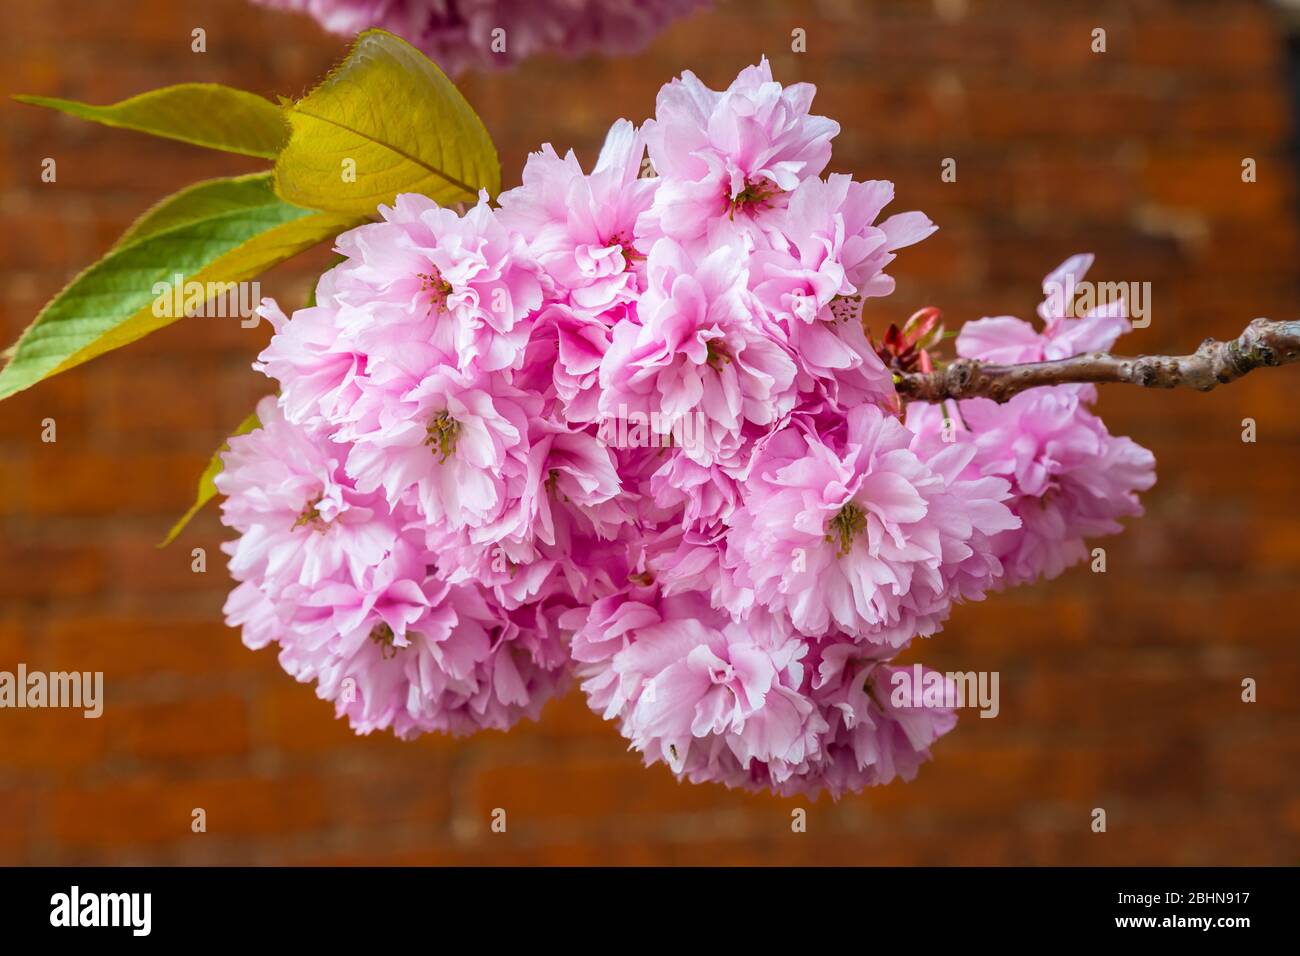 Close up of pink cherry blossom, a flower of many trees of genus Prunus. The most well-known species is the Japanese cherry, Prunus serrulata. Stock Photo